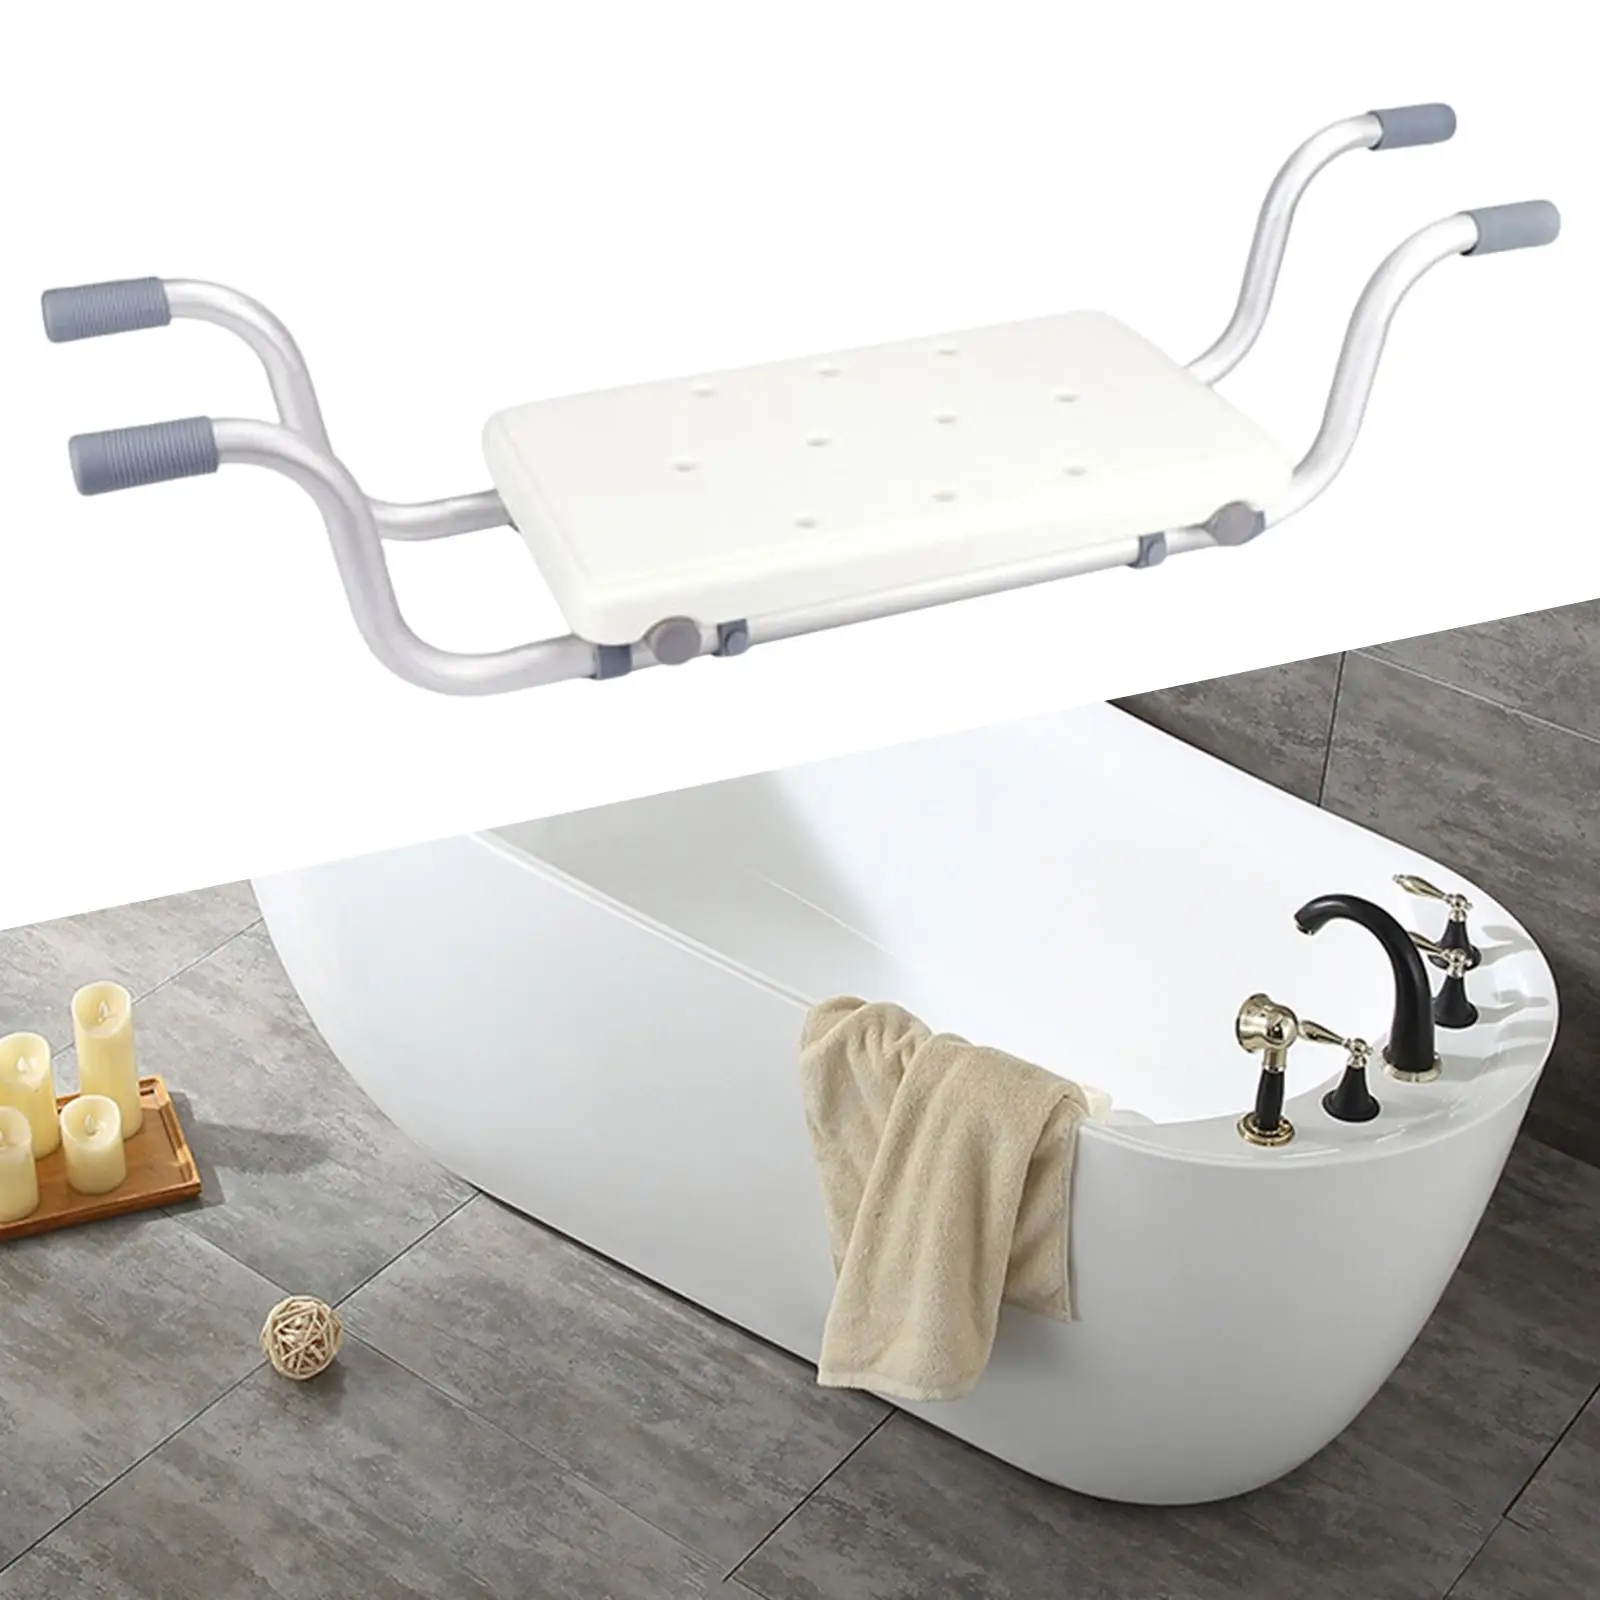 Bath, Lightweight up to 130kg Weight Shower  for Seniors Sturdy and Comfortable